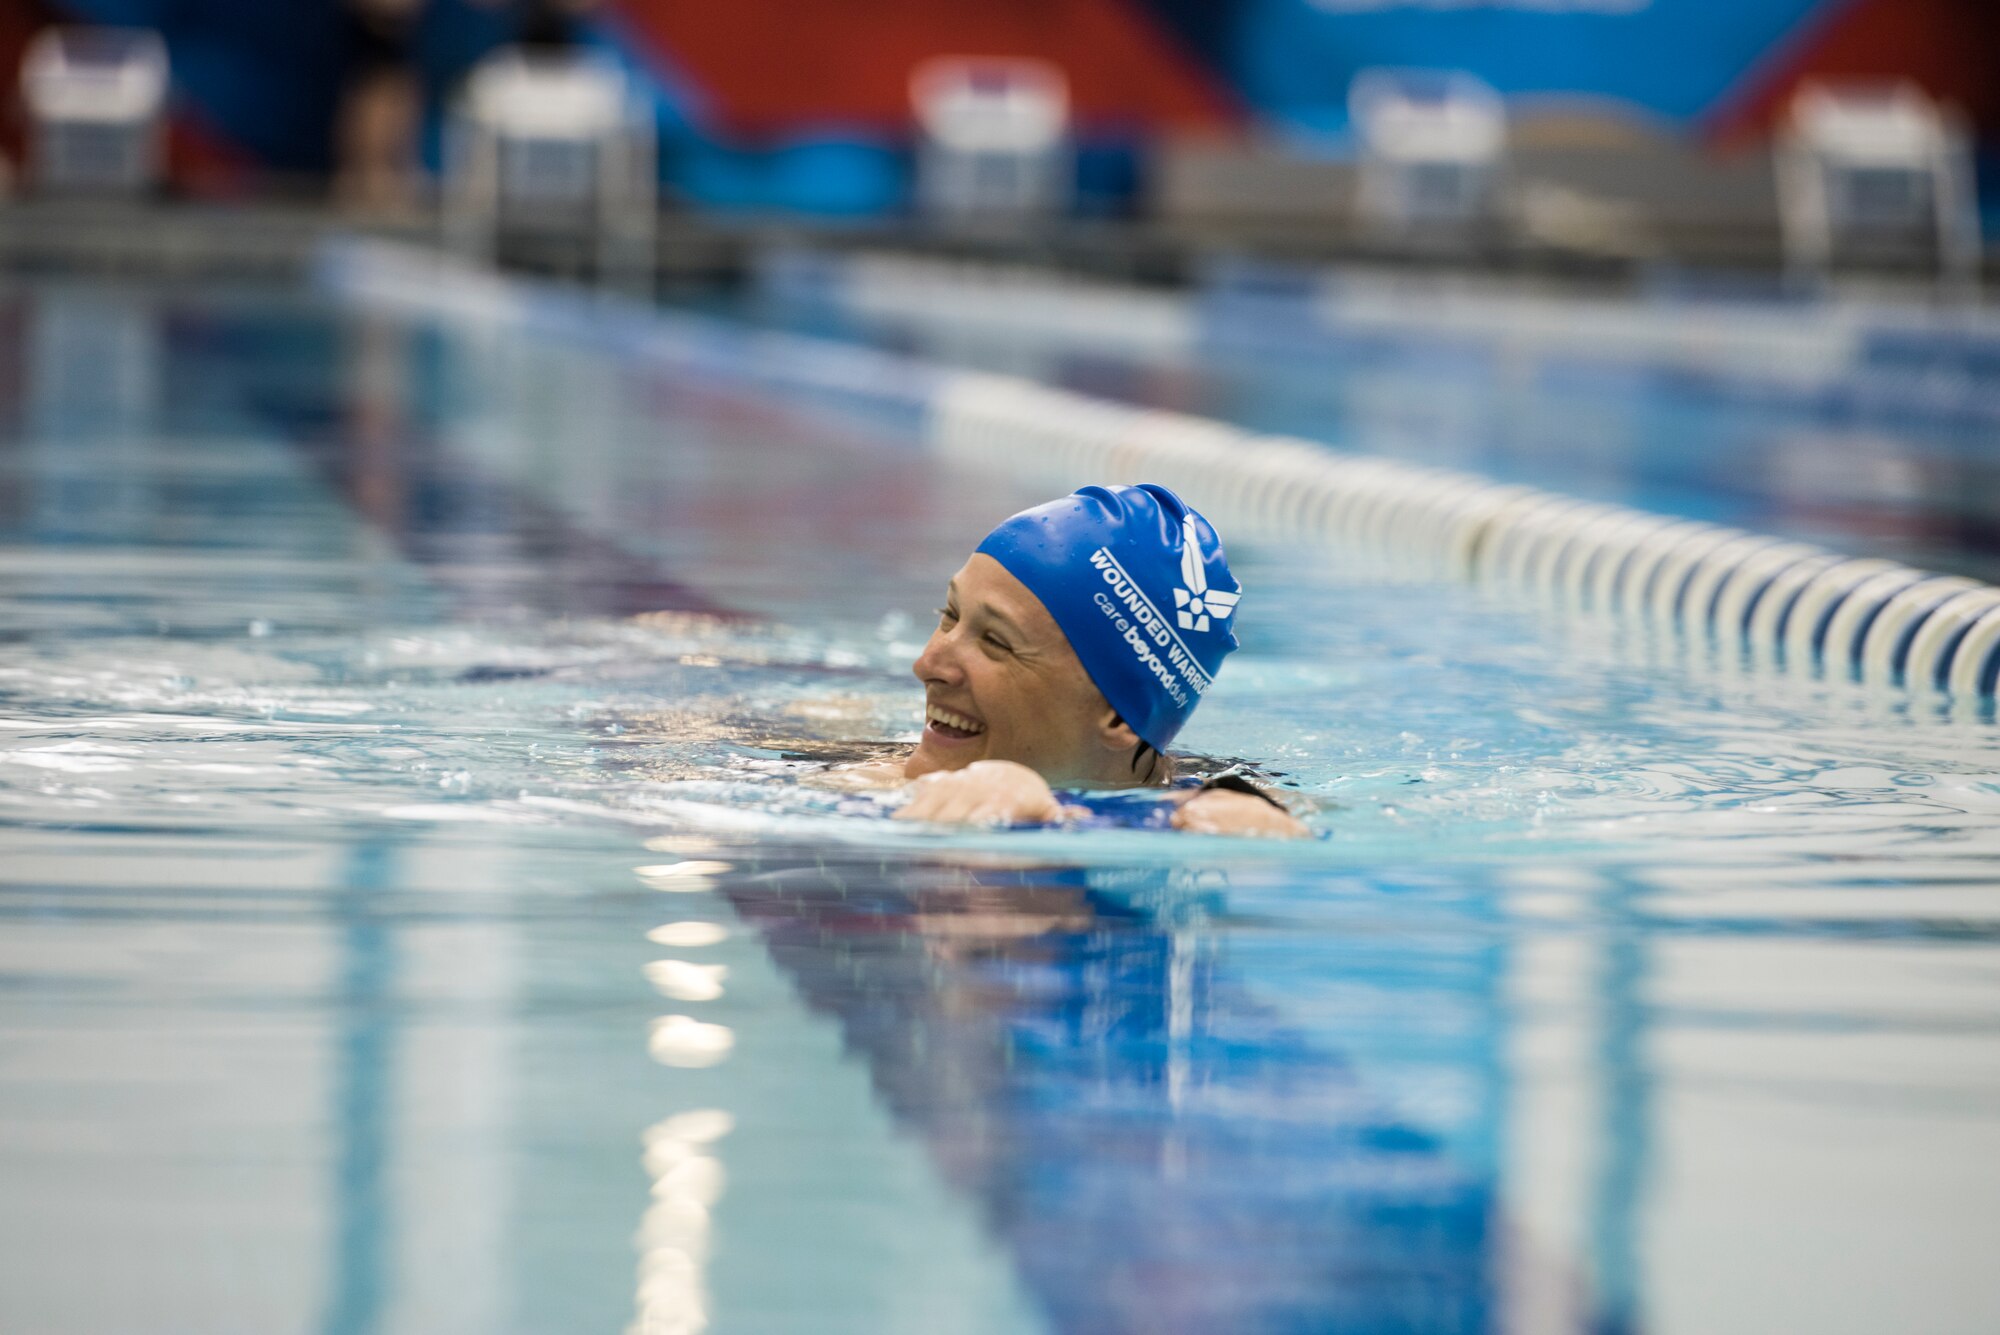 Master Sgt. Lisa Goad, Warrior Games athlete, swims during a Team Air Force swim practice at the U.S. Air Force Academy in Colorado Springs, Colo. on June 7, 2018. Goad is one of the 40 veterans and service members who competed for Team Air Force in the 2018 Department of Defense Warrior Games. (Courtesy photo)